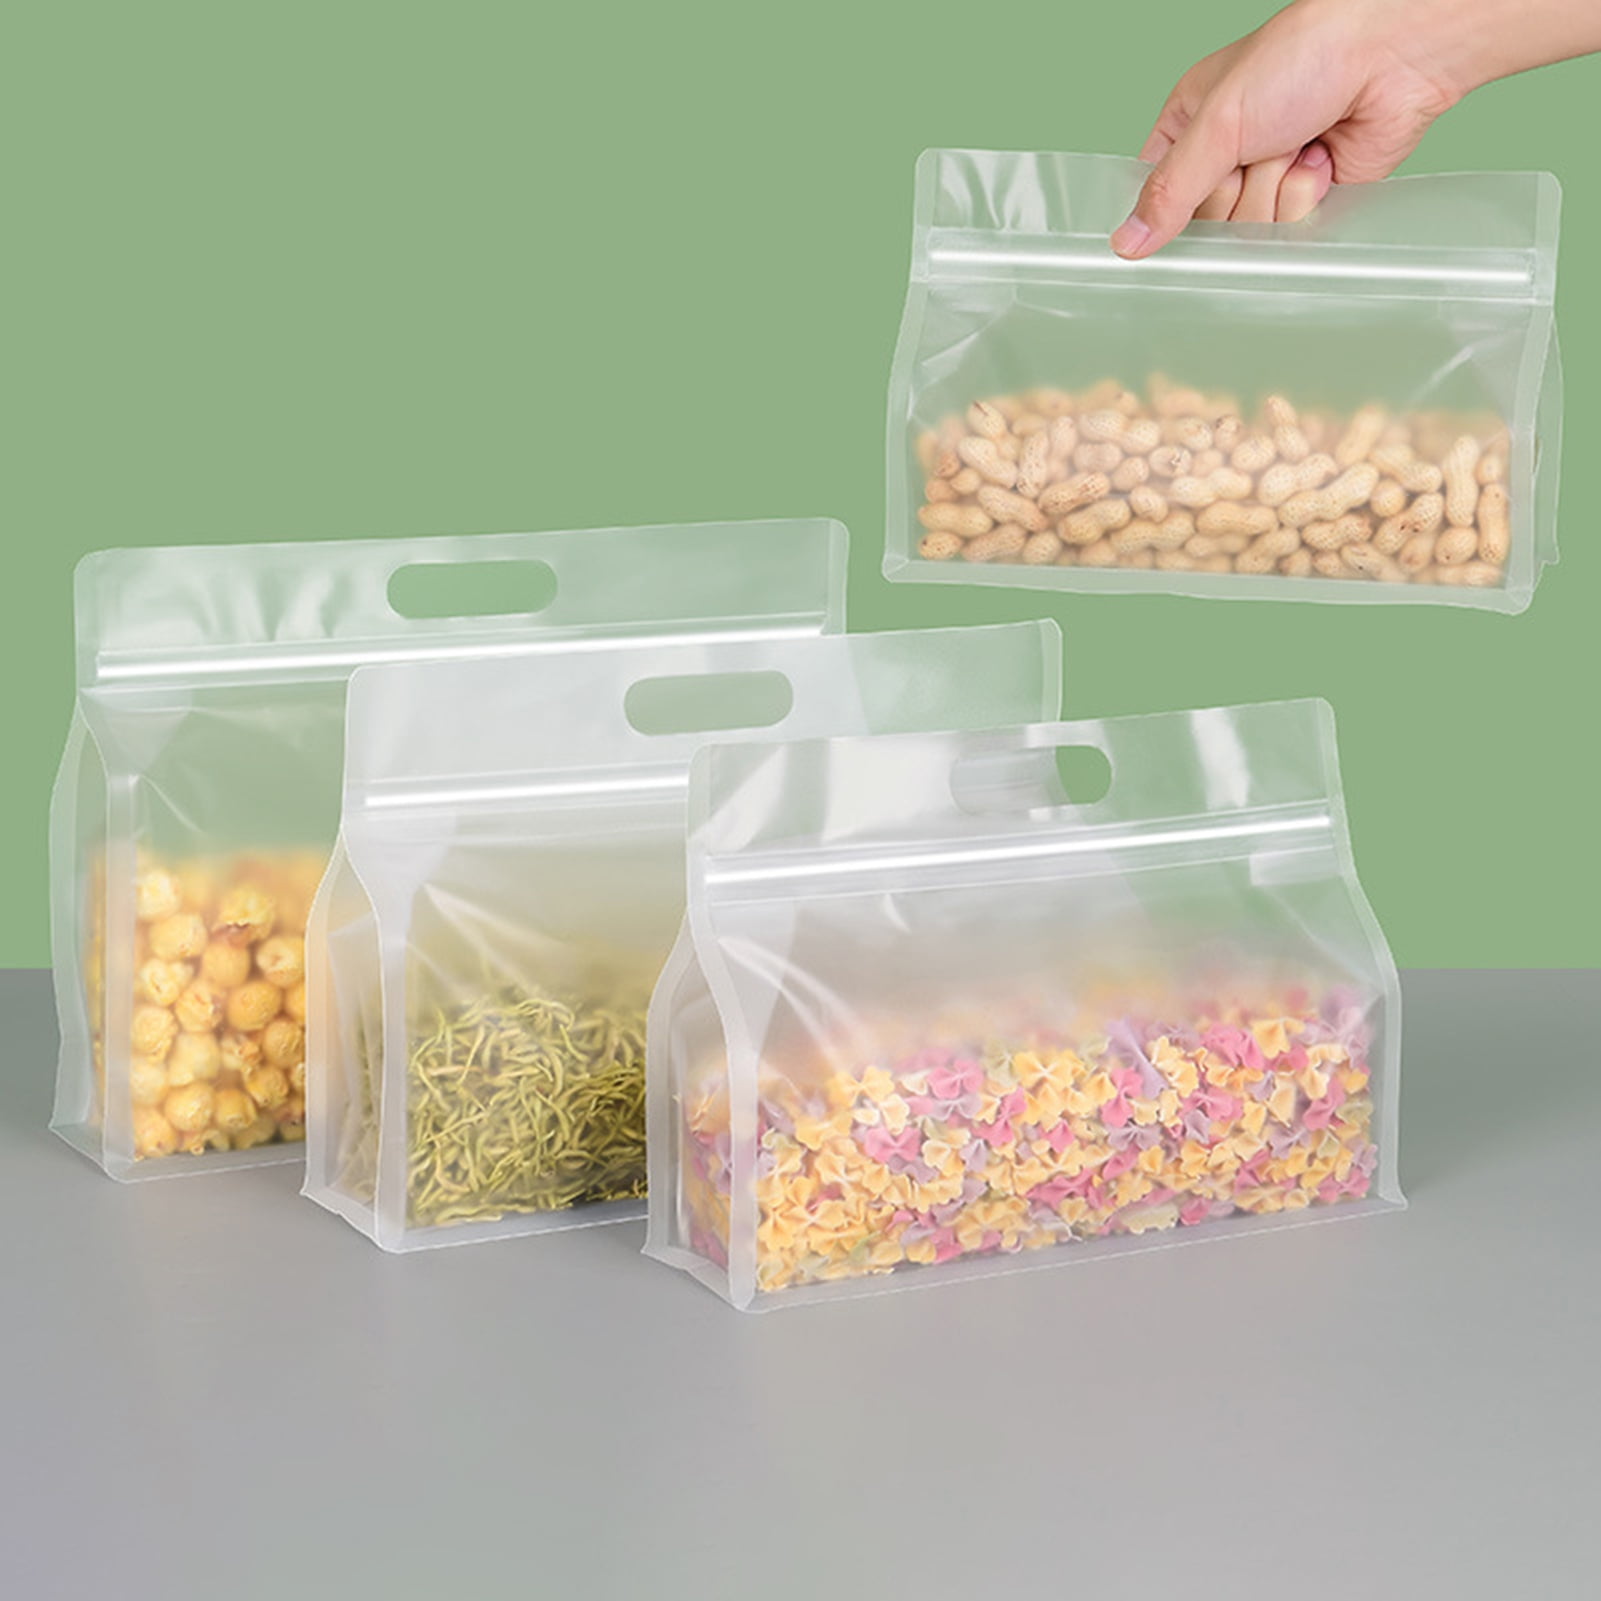 Delicious and Fresh Food Storage Bags - 200 Pack